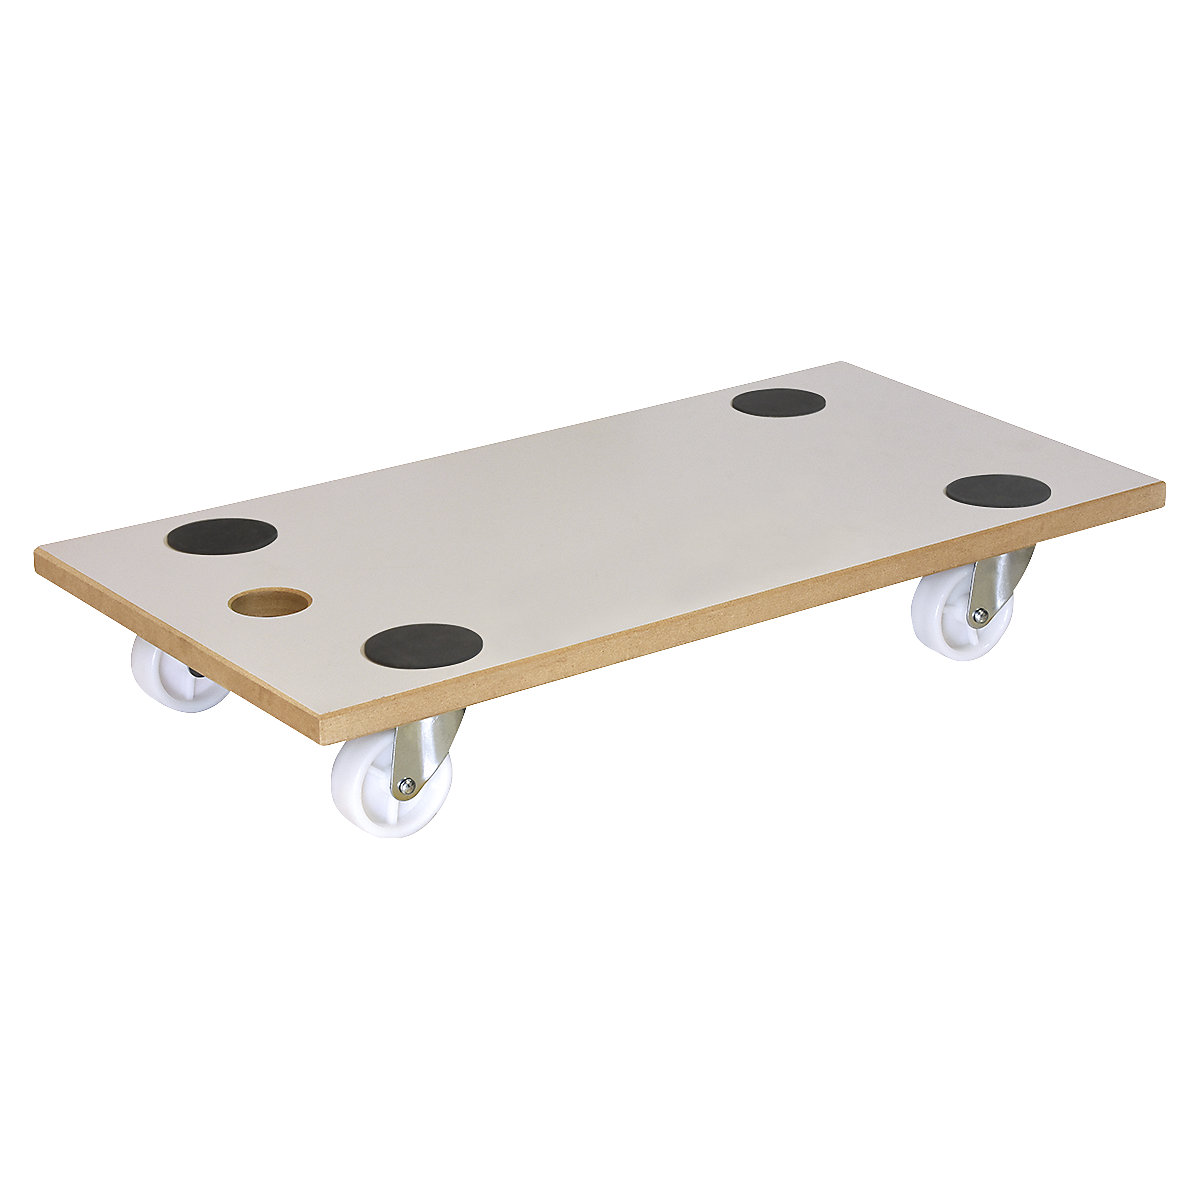 Transport dolly with grip hole – Wagner, MM 1319, castors for soft floors, pack of 2, LxW 575 x 300 mm, 5+ packs-4